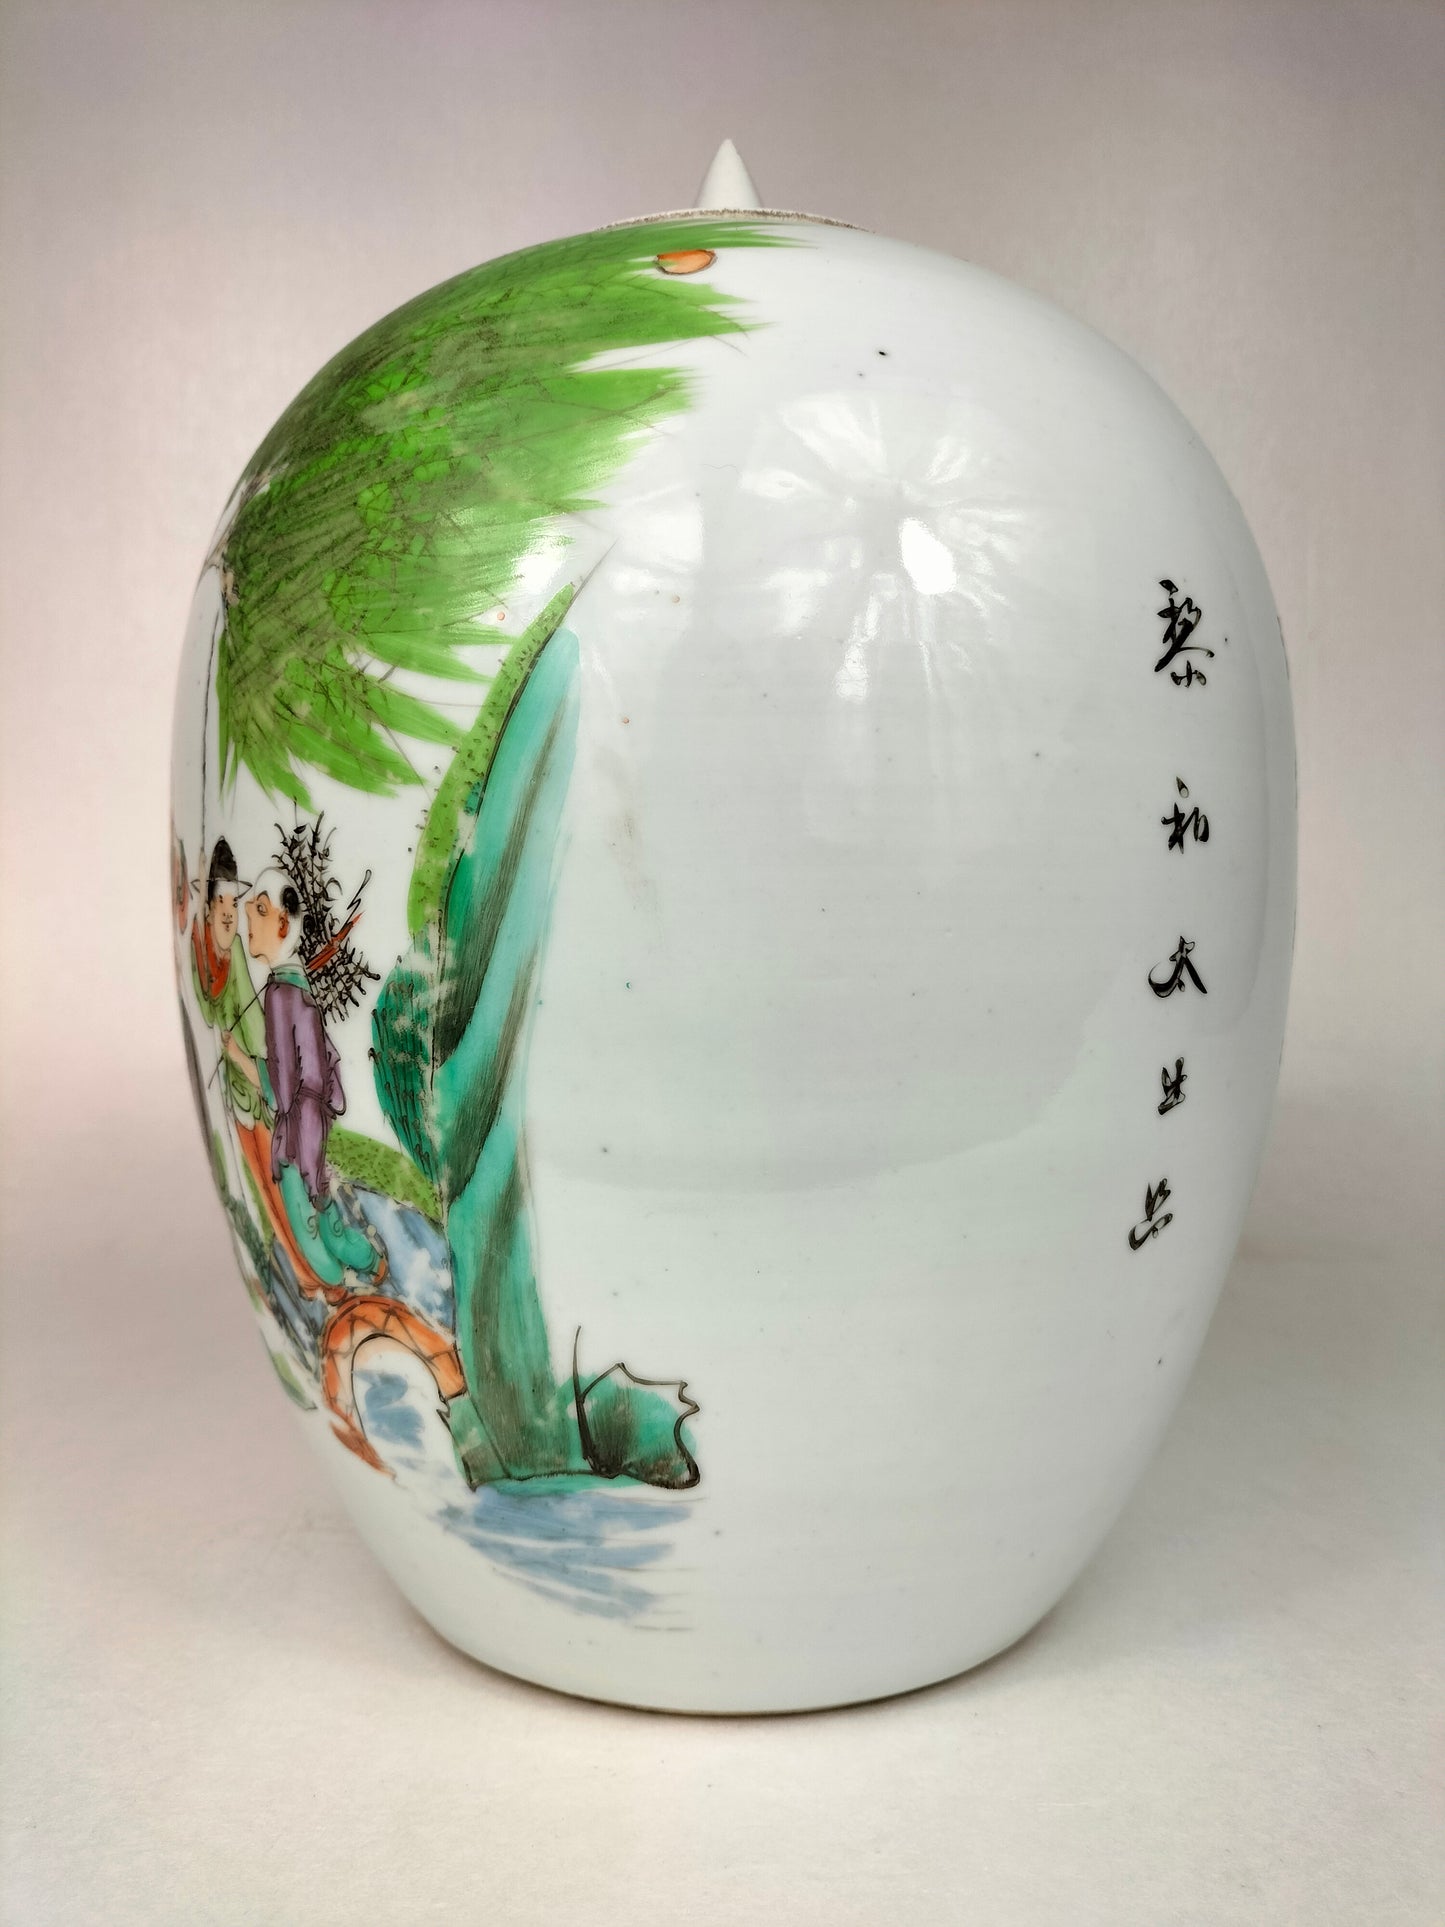 Antique Chinese ginger jar decorated with children and a water buffalo // Republic Period (1912-1949)